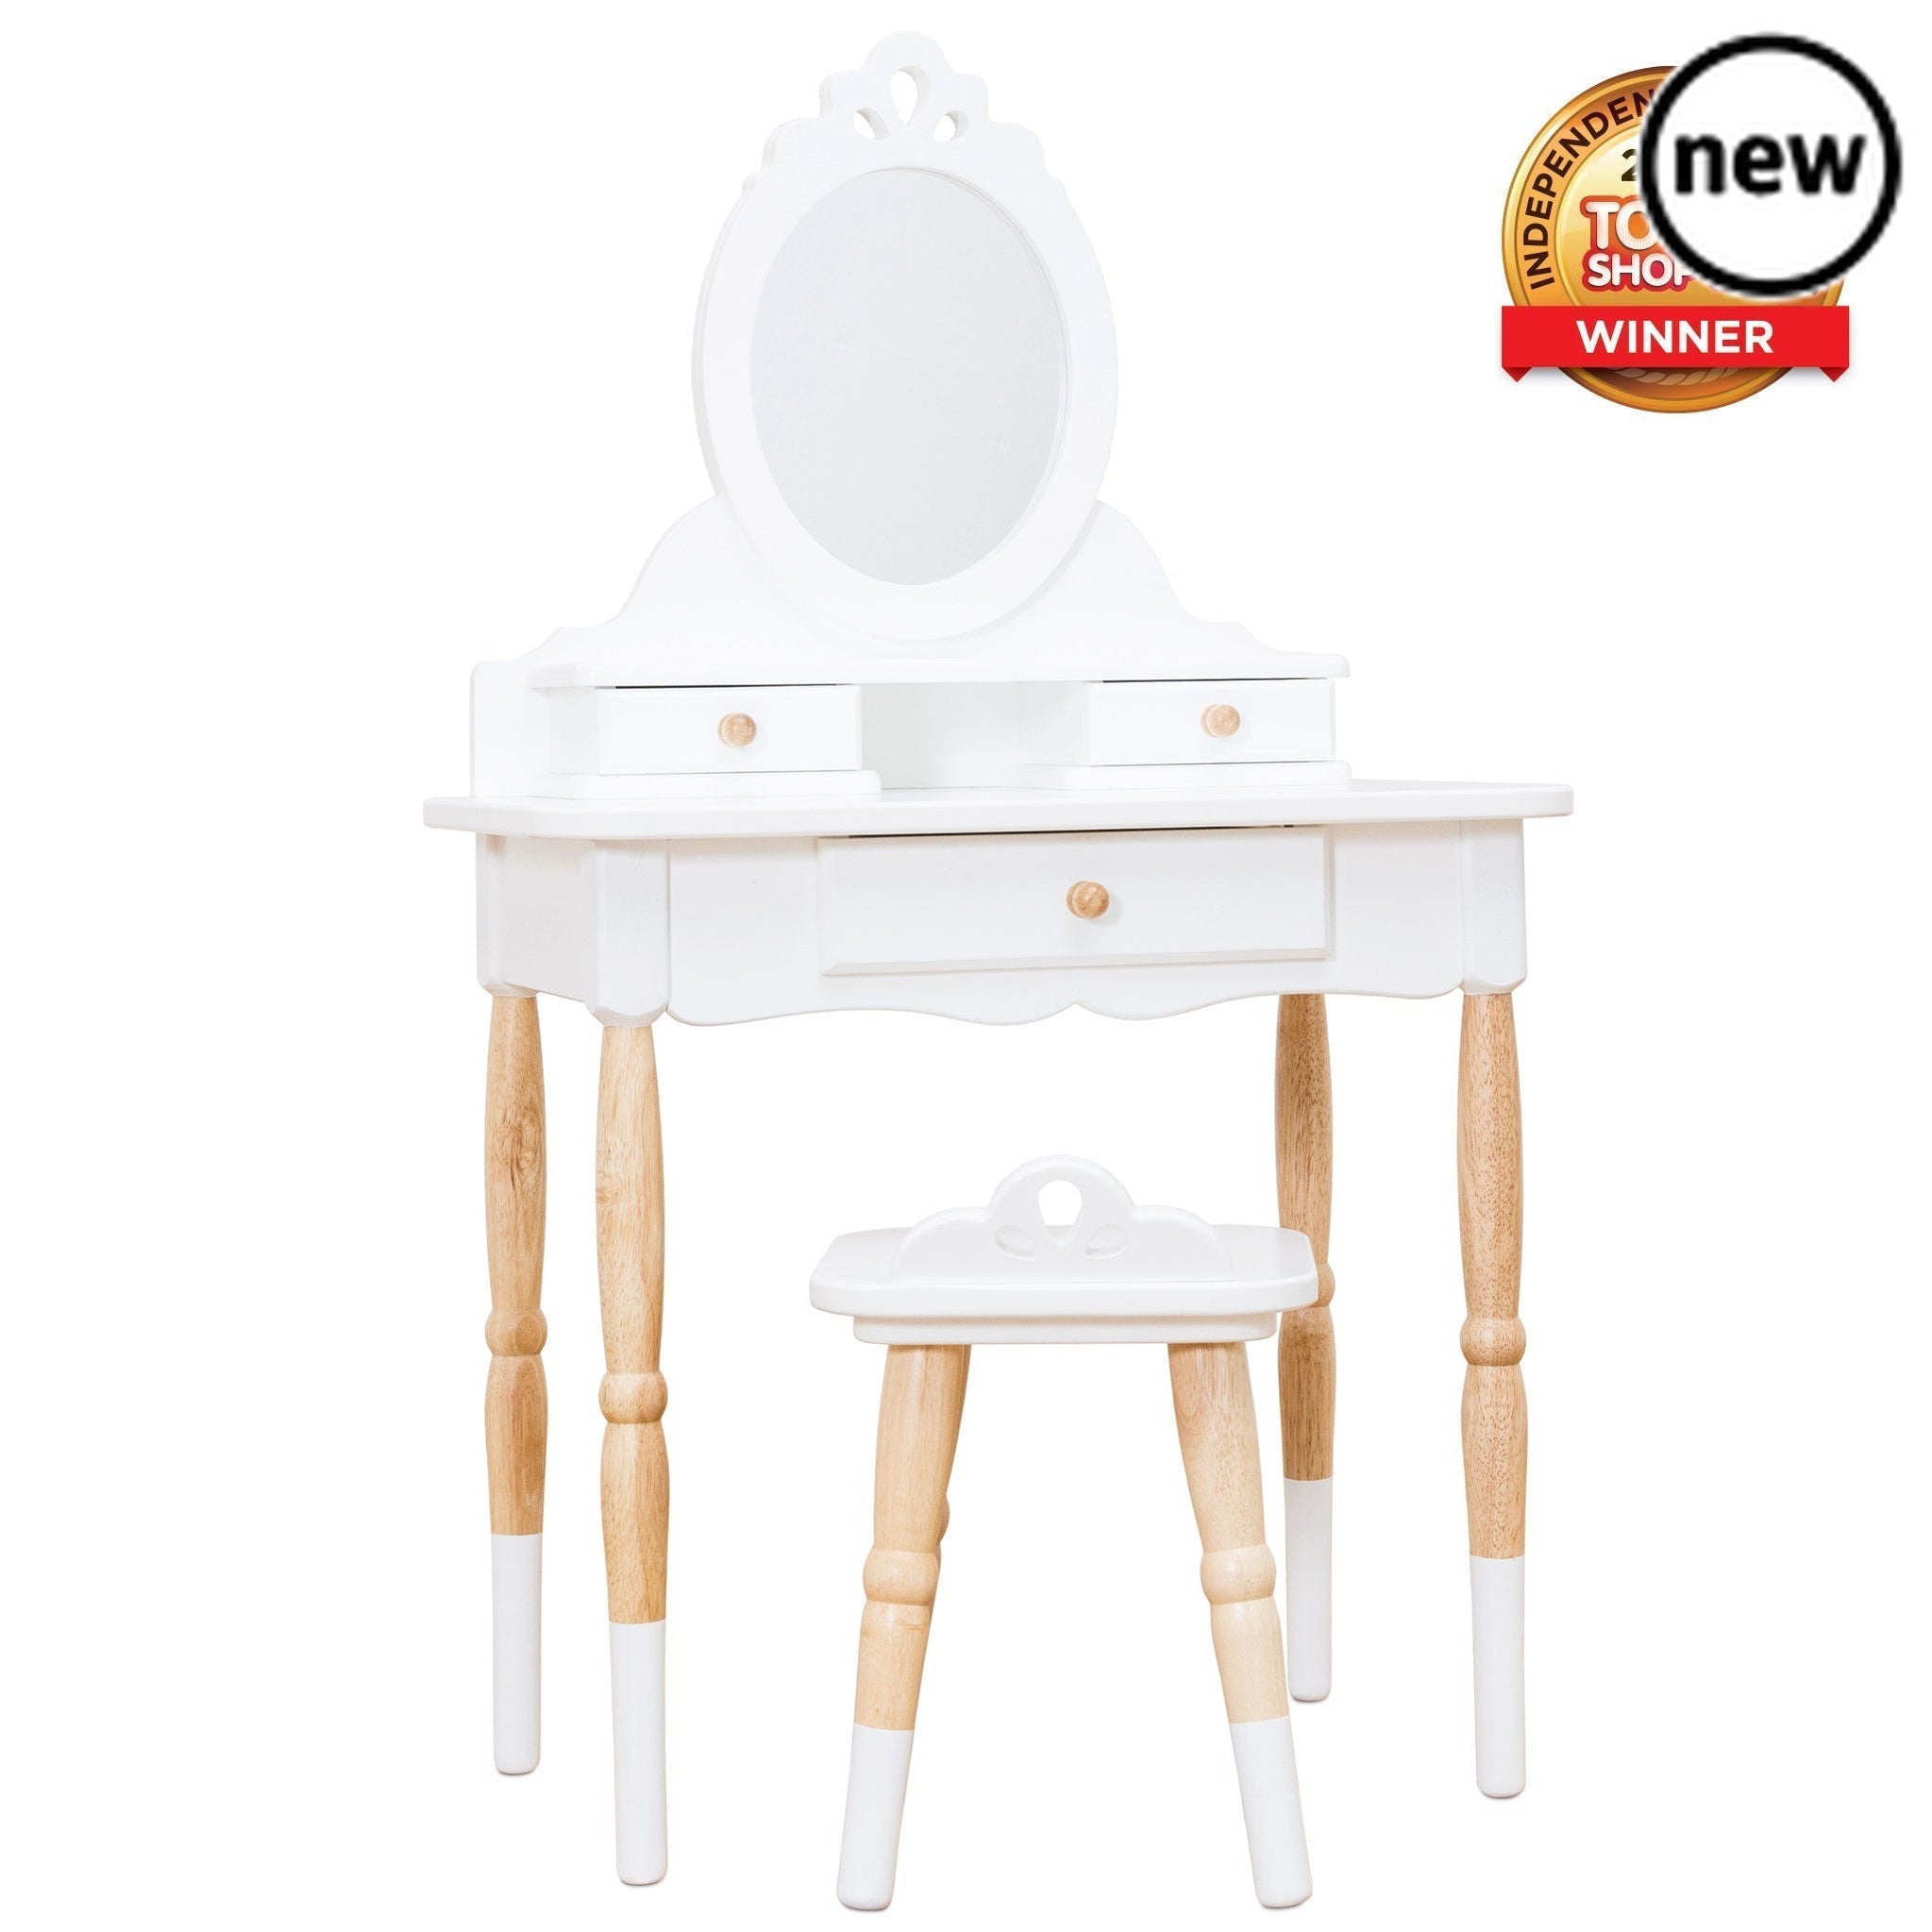 Vanity Table & Wood Stool, Description Winner of the Independent Toy Gold Award 2022 This beautiful, vintage style vanity table is sure to make childhood dreams come true! The perfect addition to your child's bedroom or playroom, this stunning dressing table is full of timeless elegance to delight little ones, for engaging play. With an impressive Victorian inspired oval mirror, 2-tiered table and 3 separate storage drawers - perfect for stowing away little treasures and trinkets. Hand crafted by highly ski